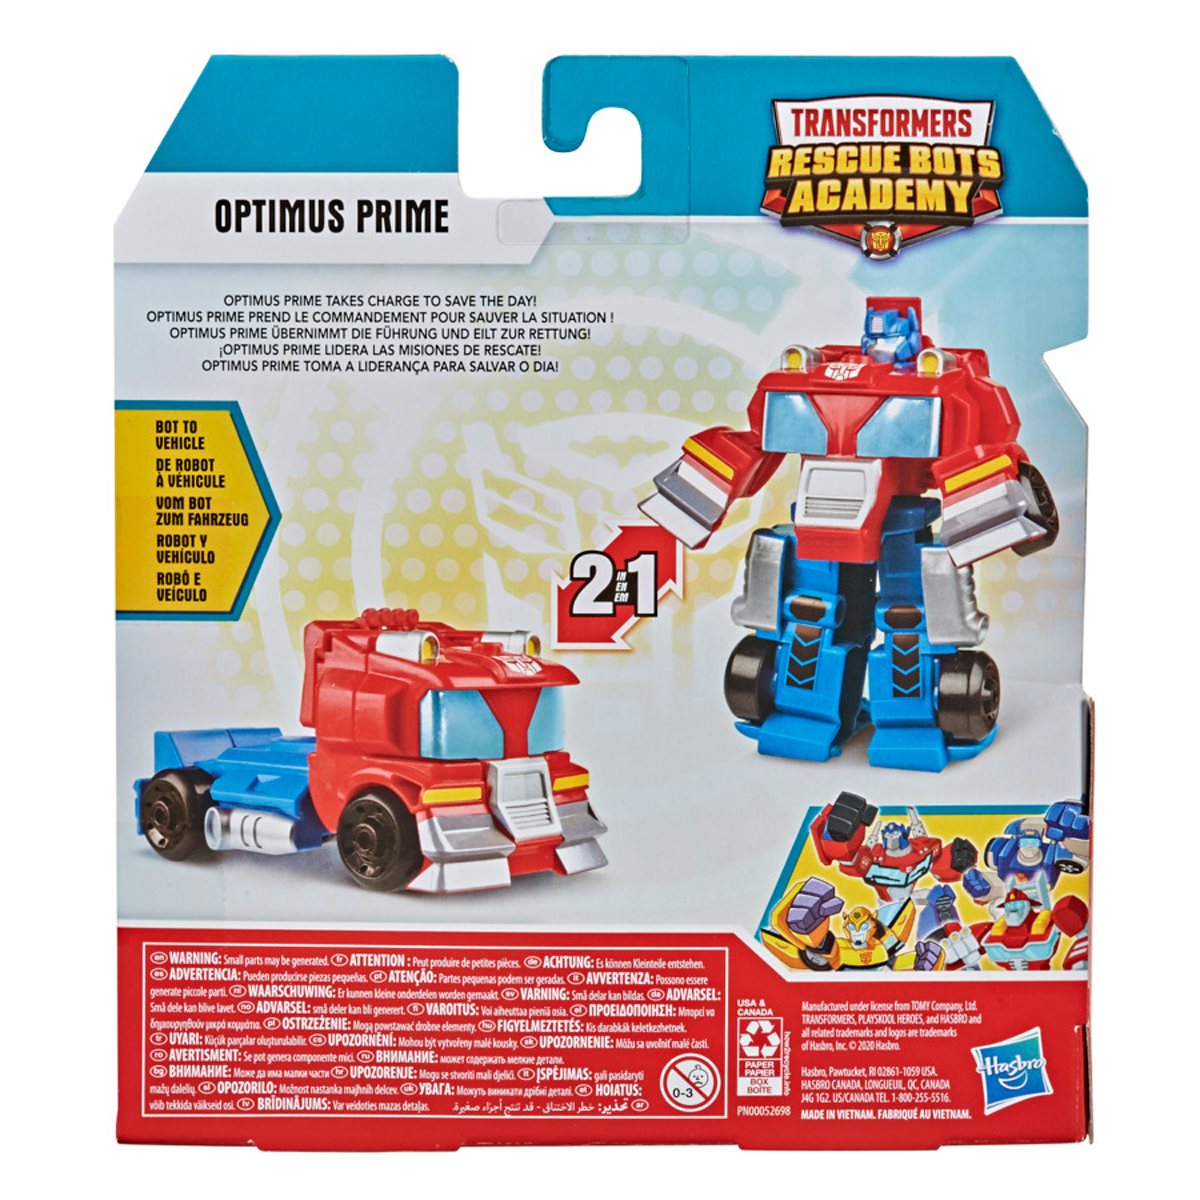 New in stock Transformers Rescue Bots Academy Classic Heroes Heat Wave 